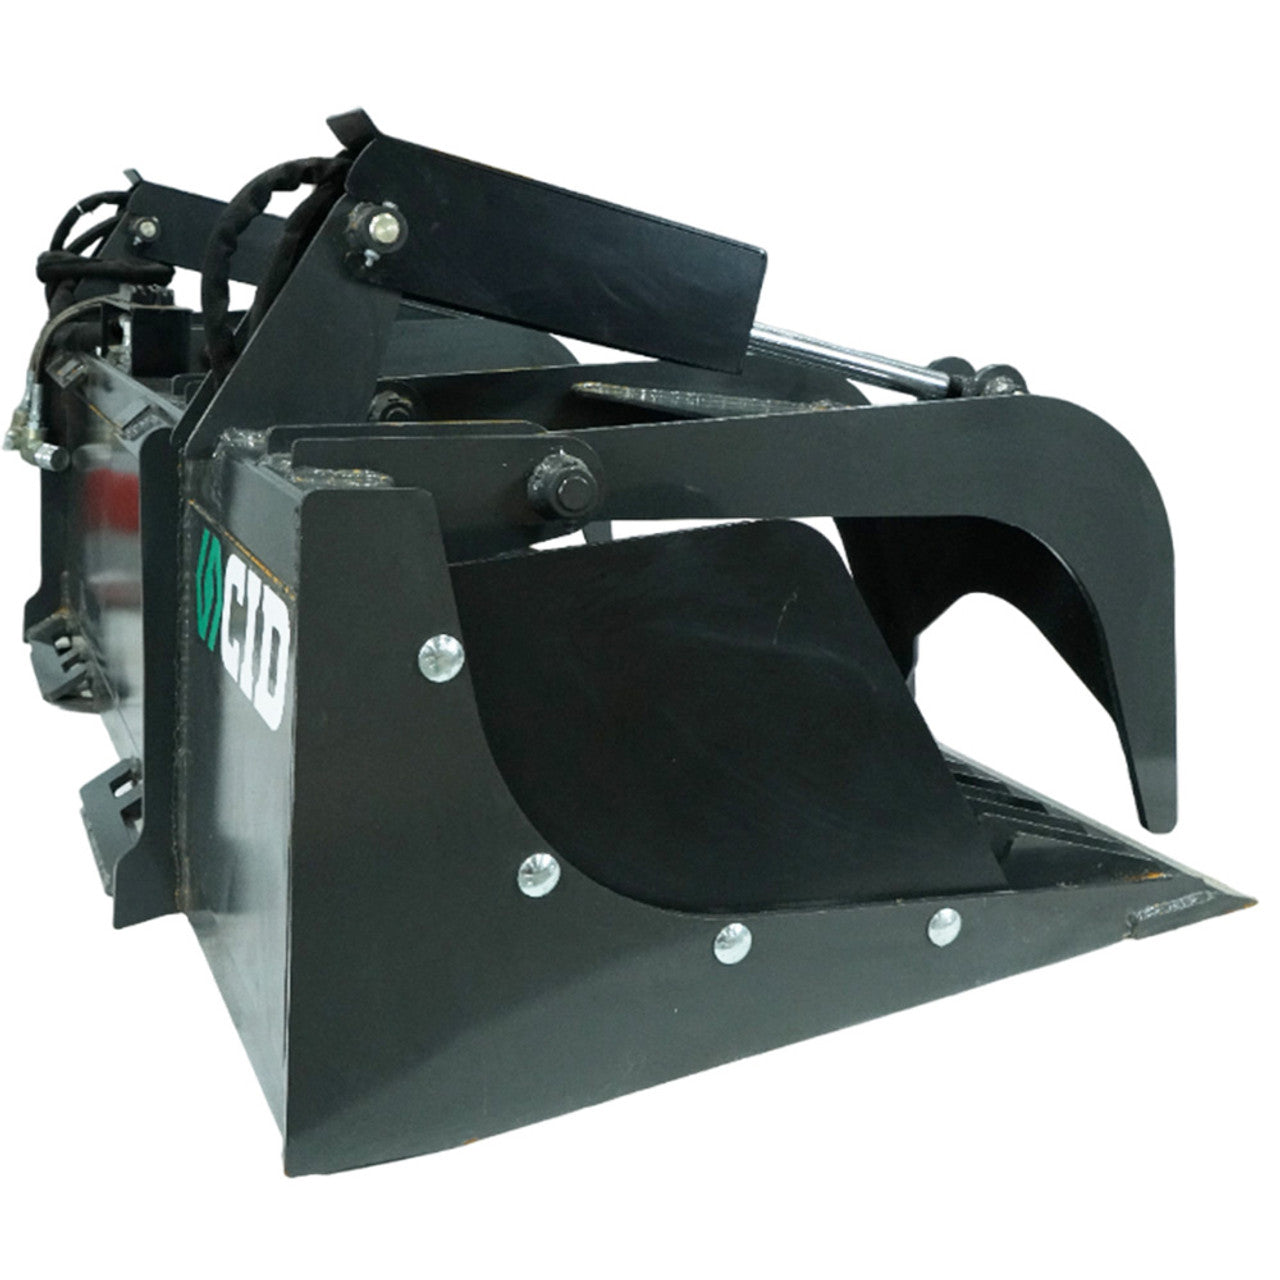 CID 63", 66", 72",78" & 81" HEAVY DUTY ROCK GRAPPLE ATTACHMENT FOR SKID STEER